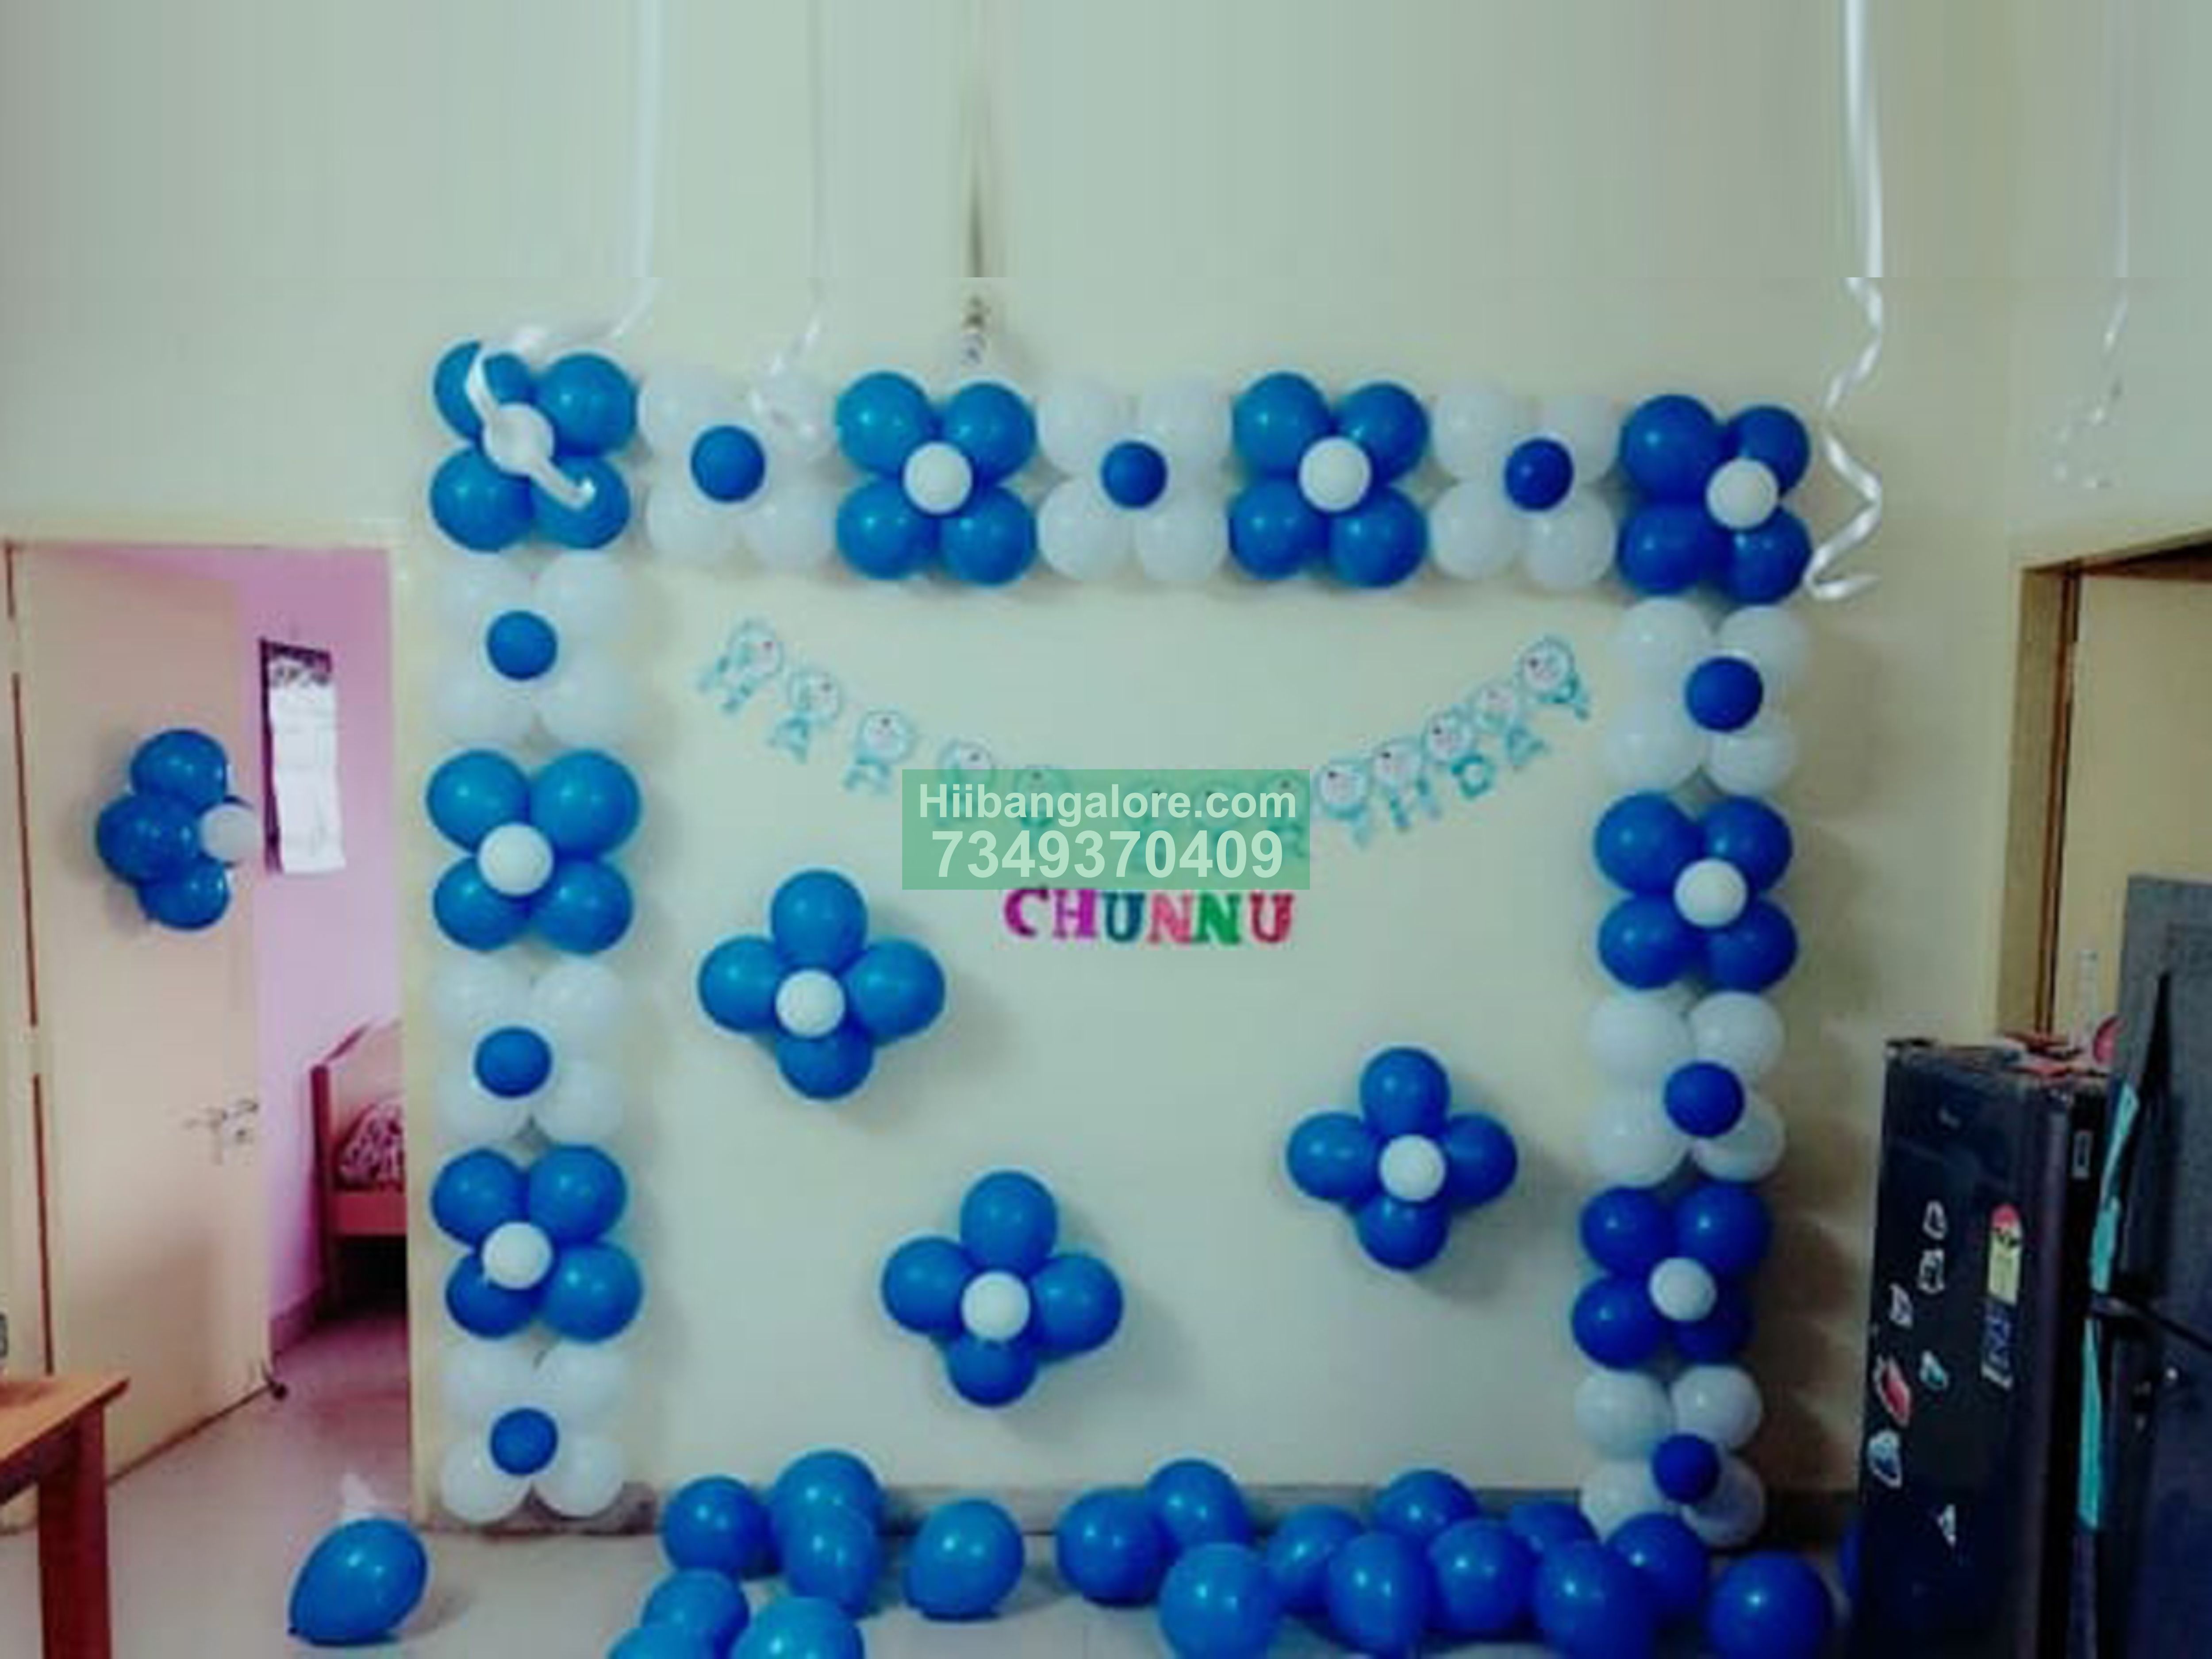 Boy baby simple birthday decoration at home - Catering services ...